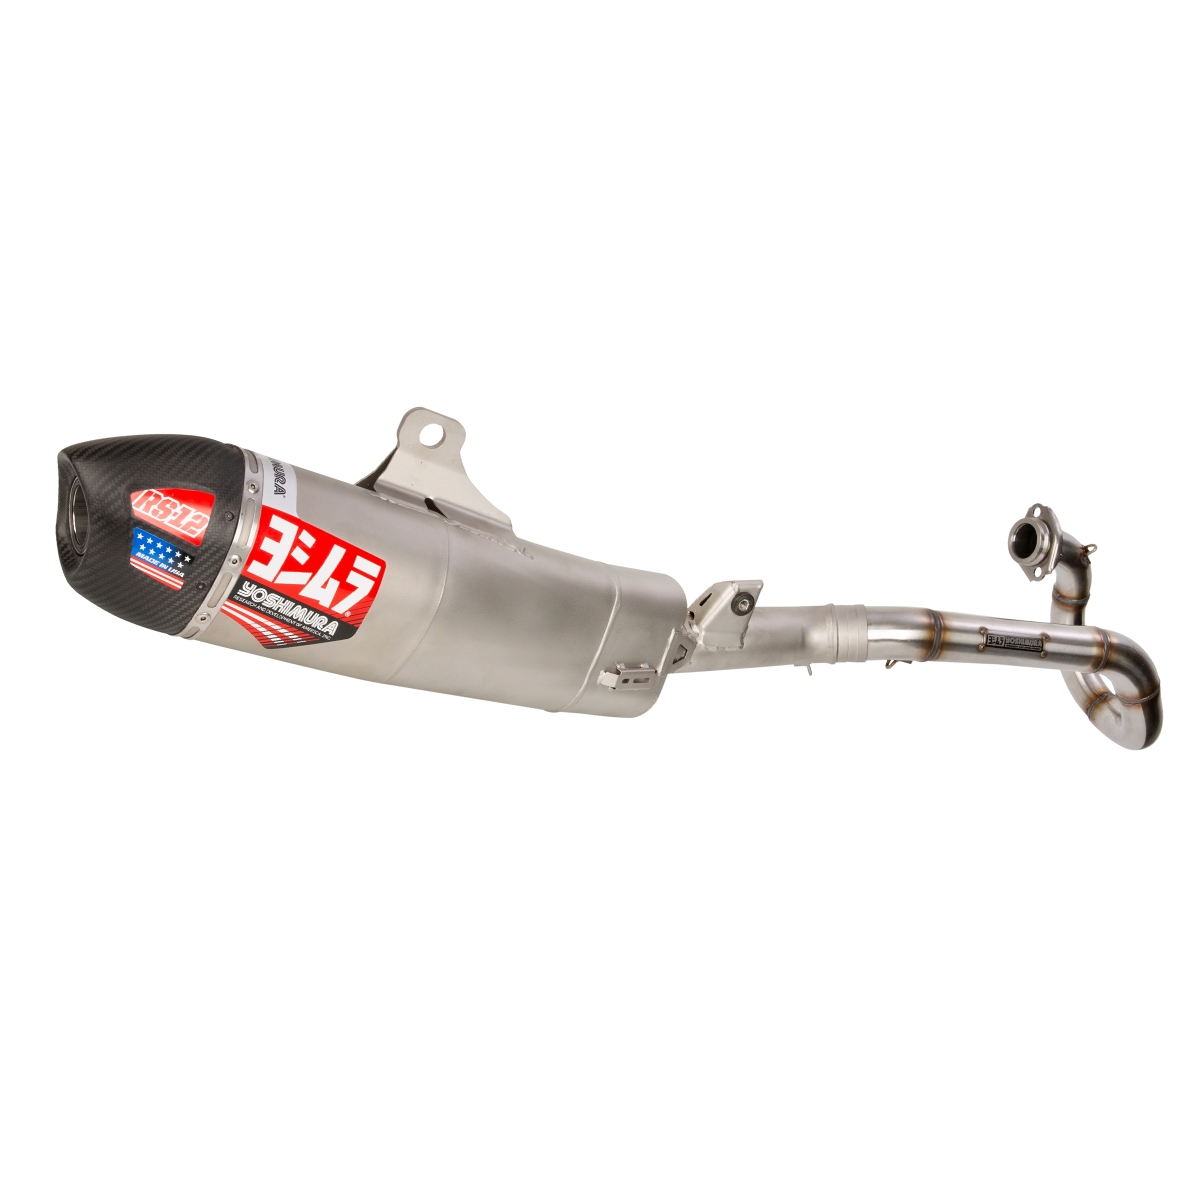 Yoshimura Exhaust System RS12 Honda CRF 250R '22, Stainless steel